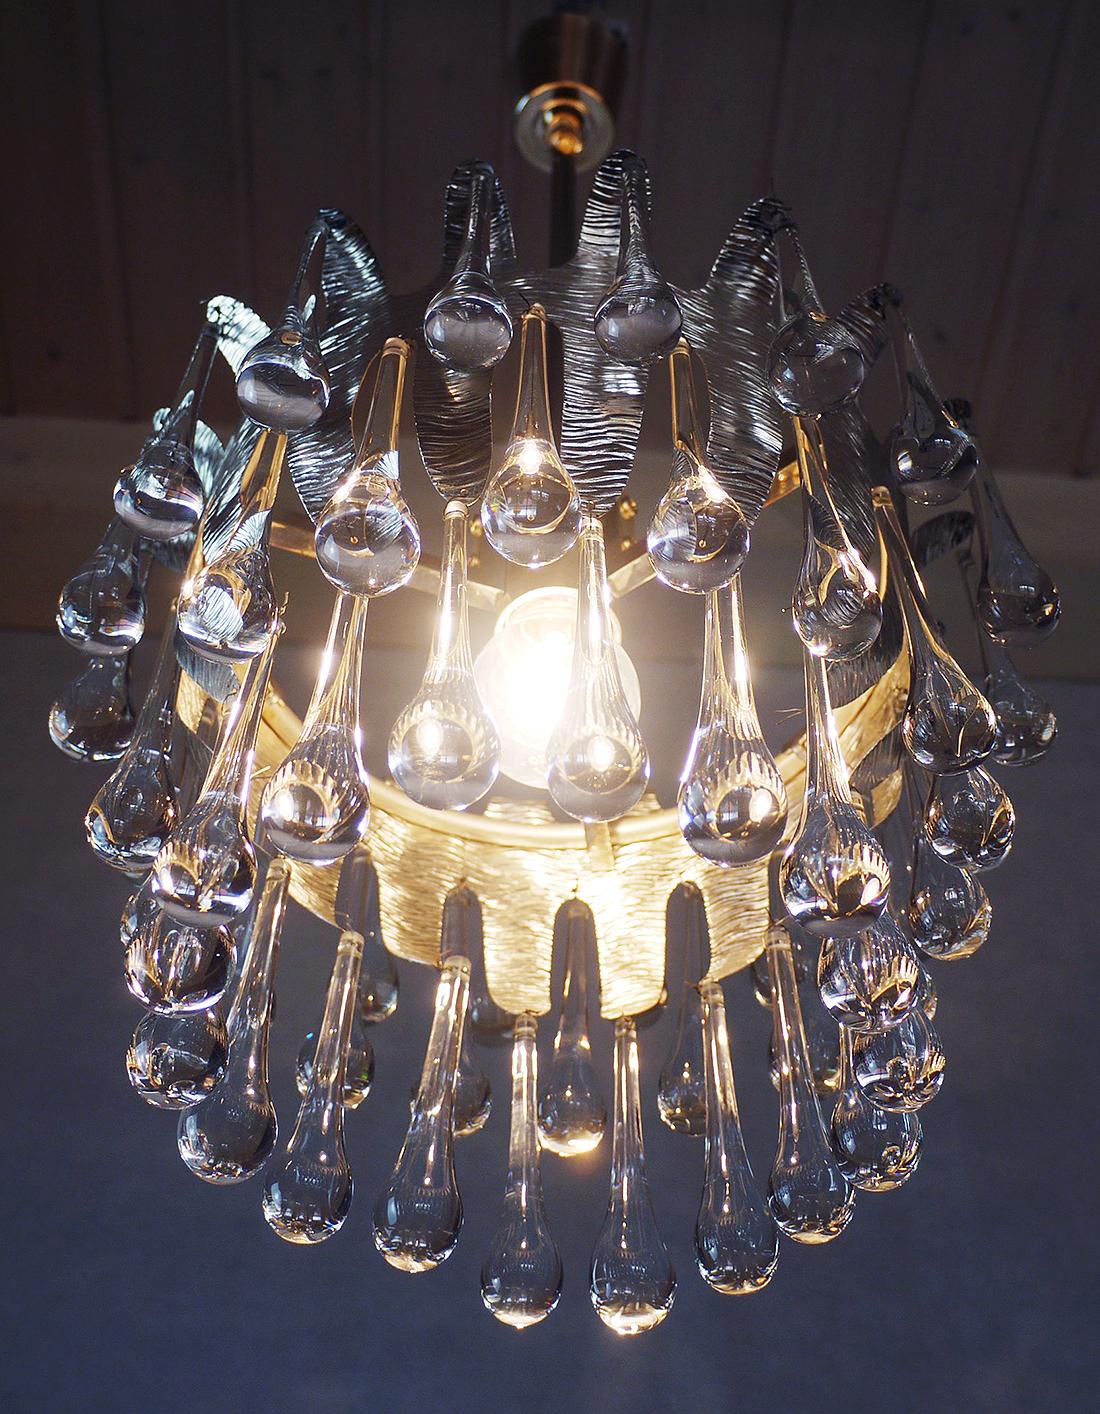 Elegant teardrop chandelier made by Venini of transparent Murano glass drops mounted on a silver plated brass frame with silver leafs. 

Chandelier illuminates beautifully and offers a lot of light. A real eyecatcher even unlit. Heavy duty. Designed